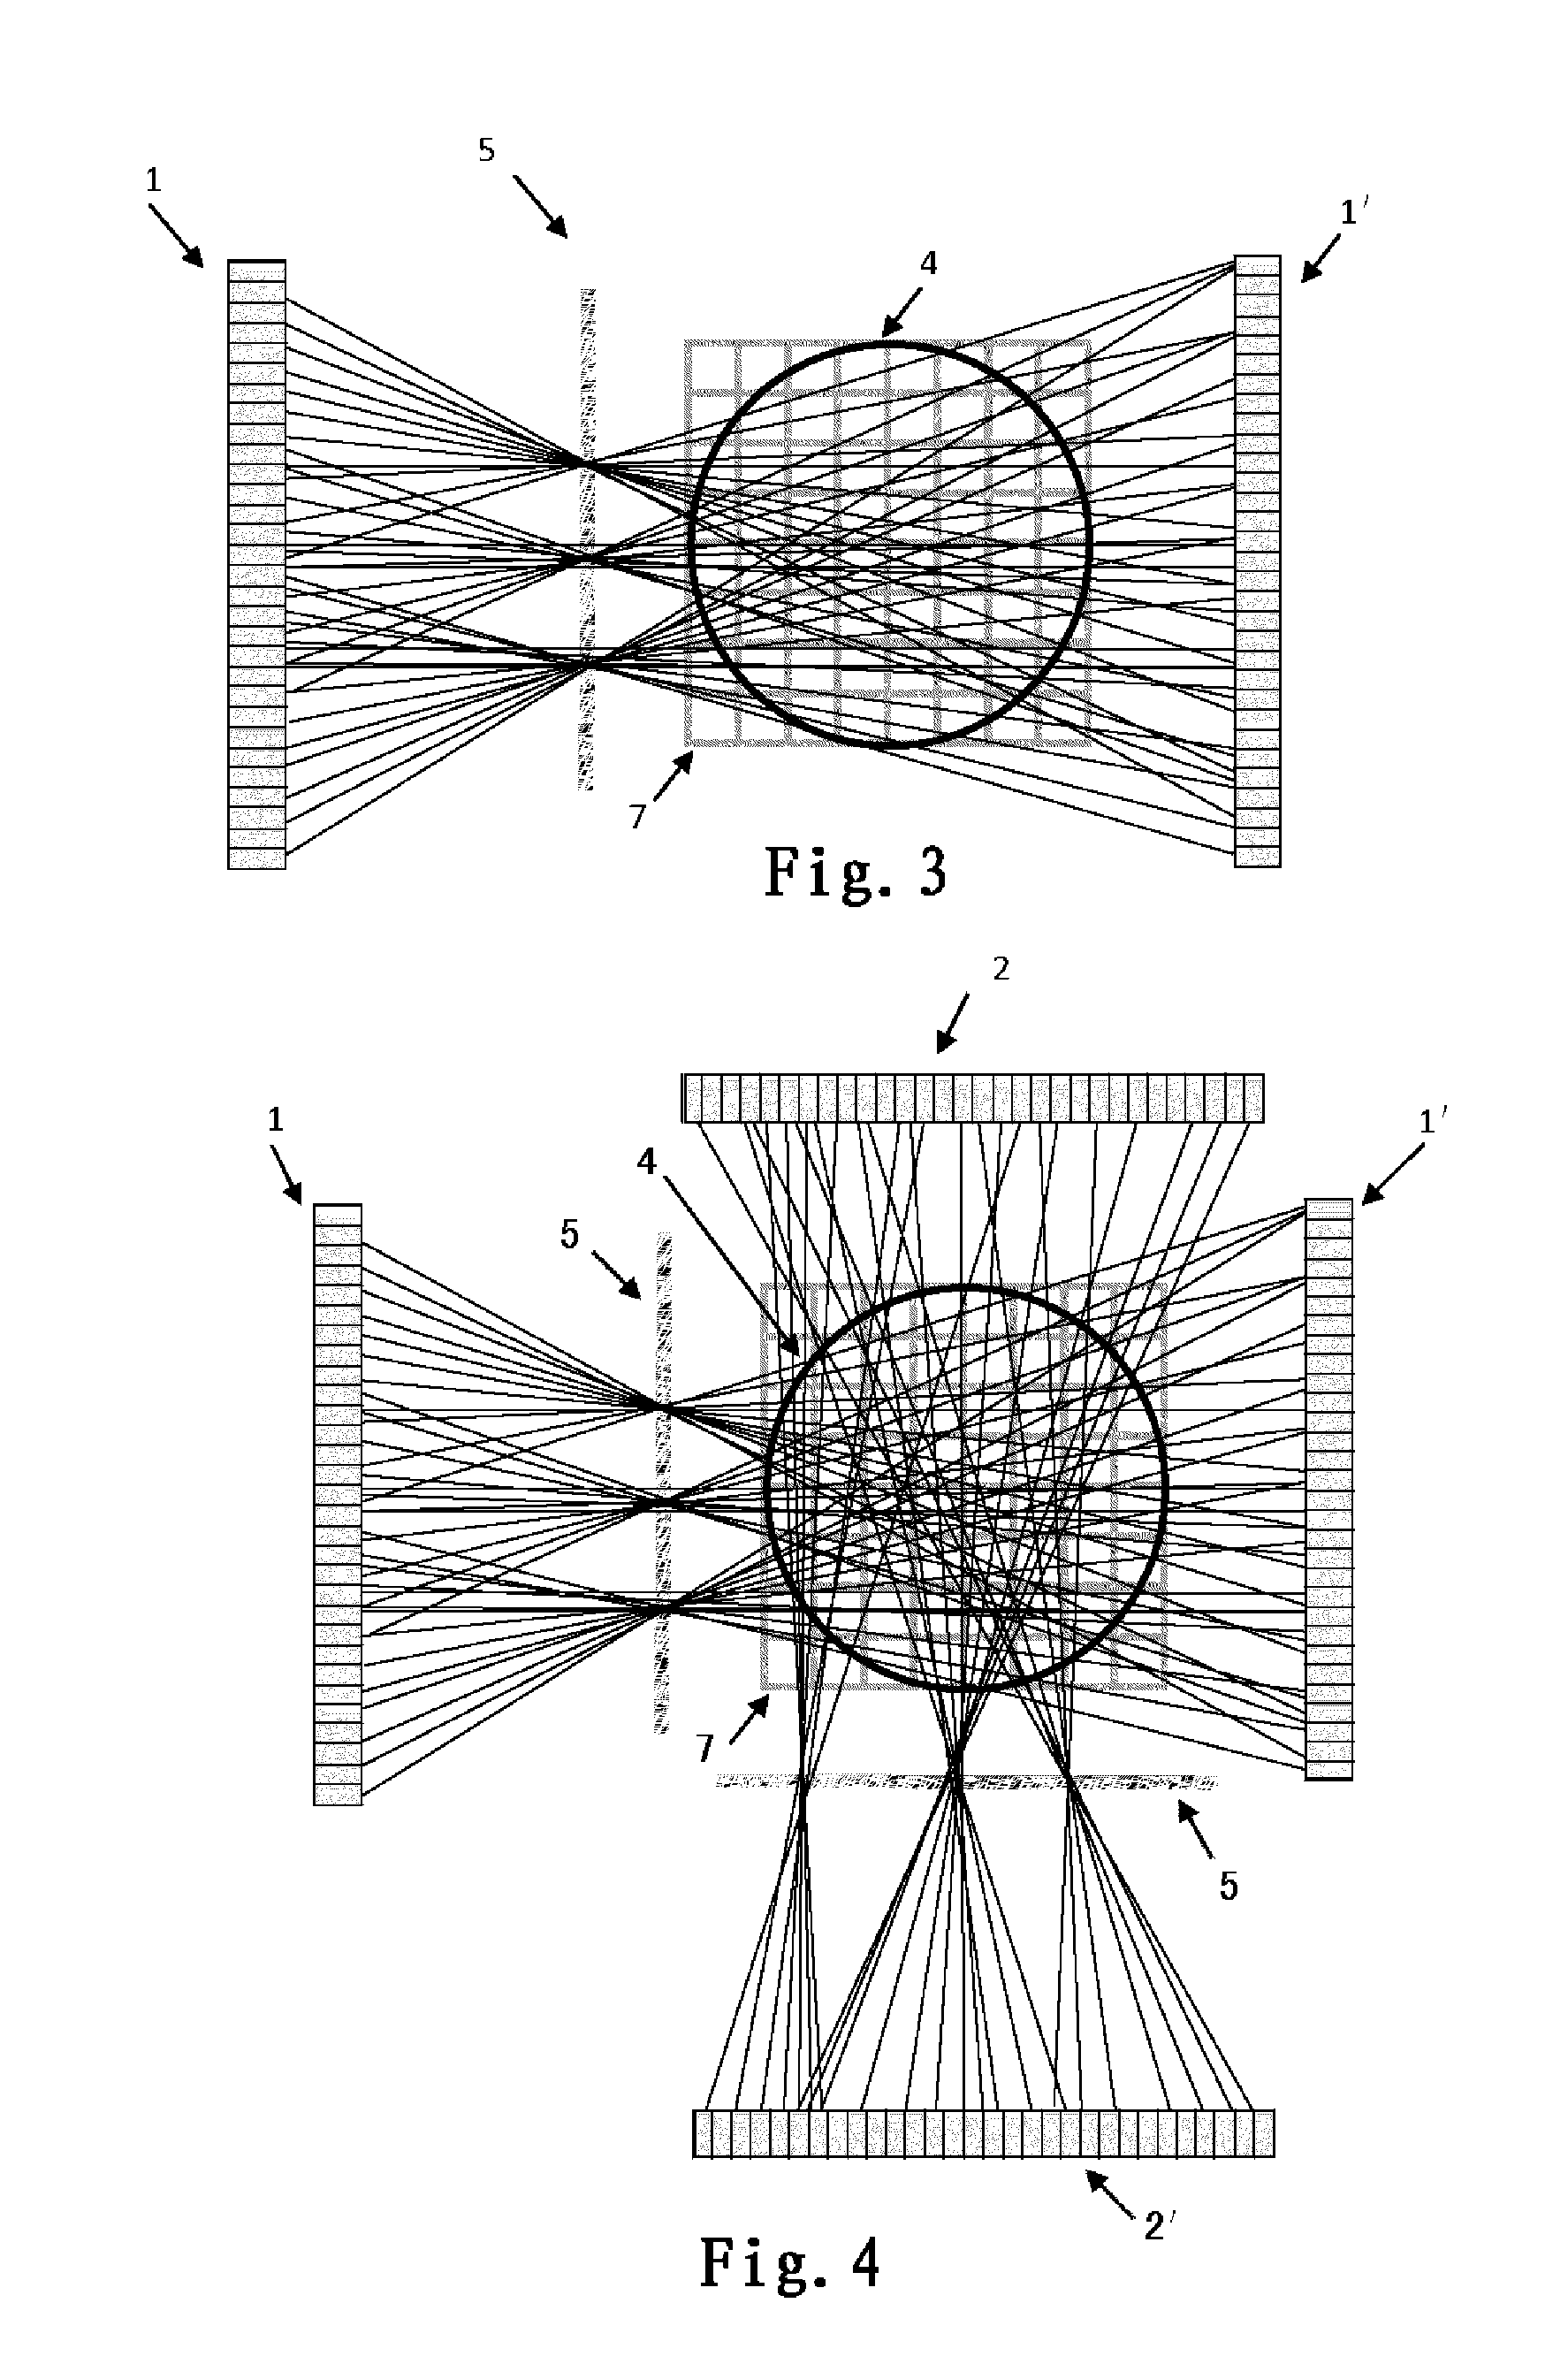 Positron tomography imaging apparatus and method for multiphase flow